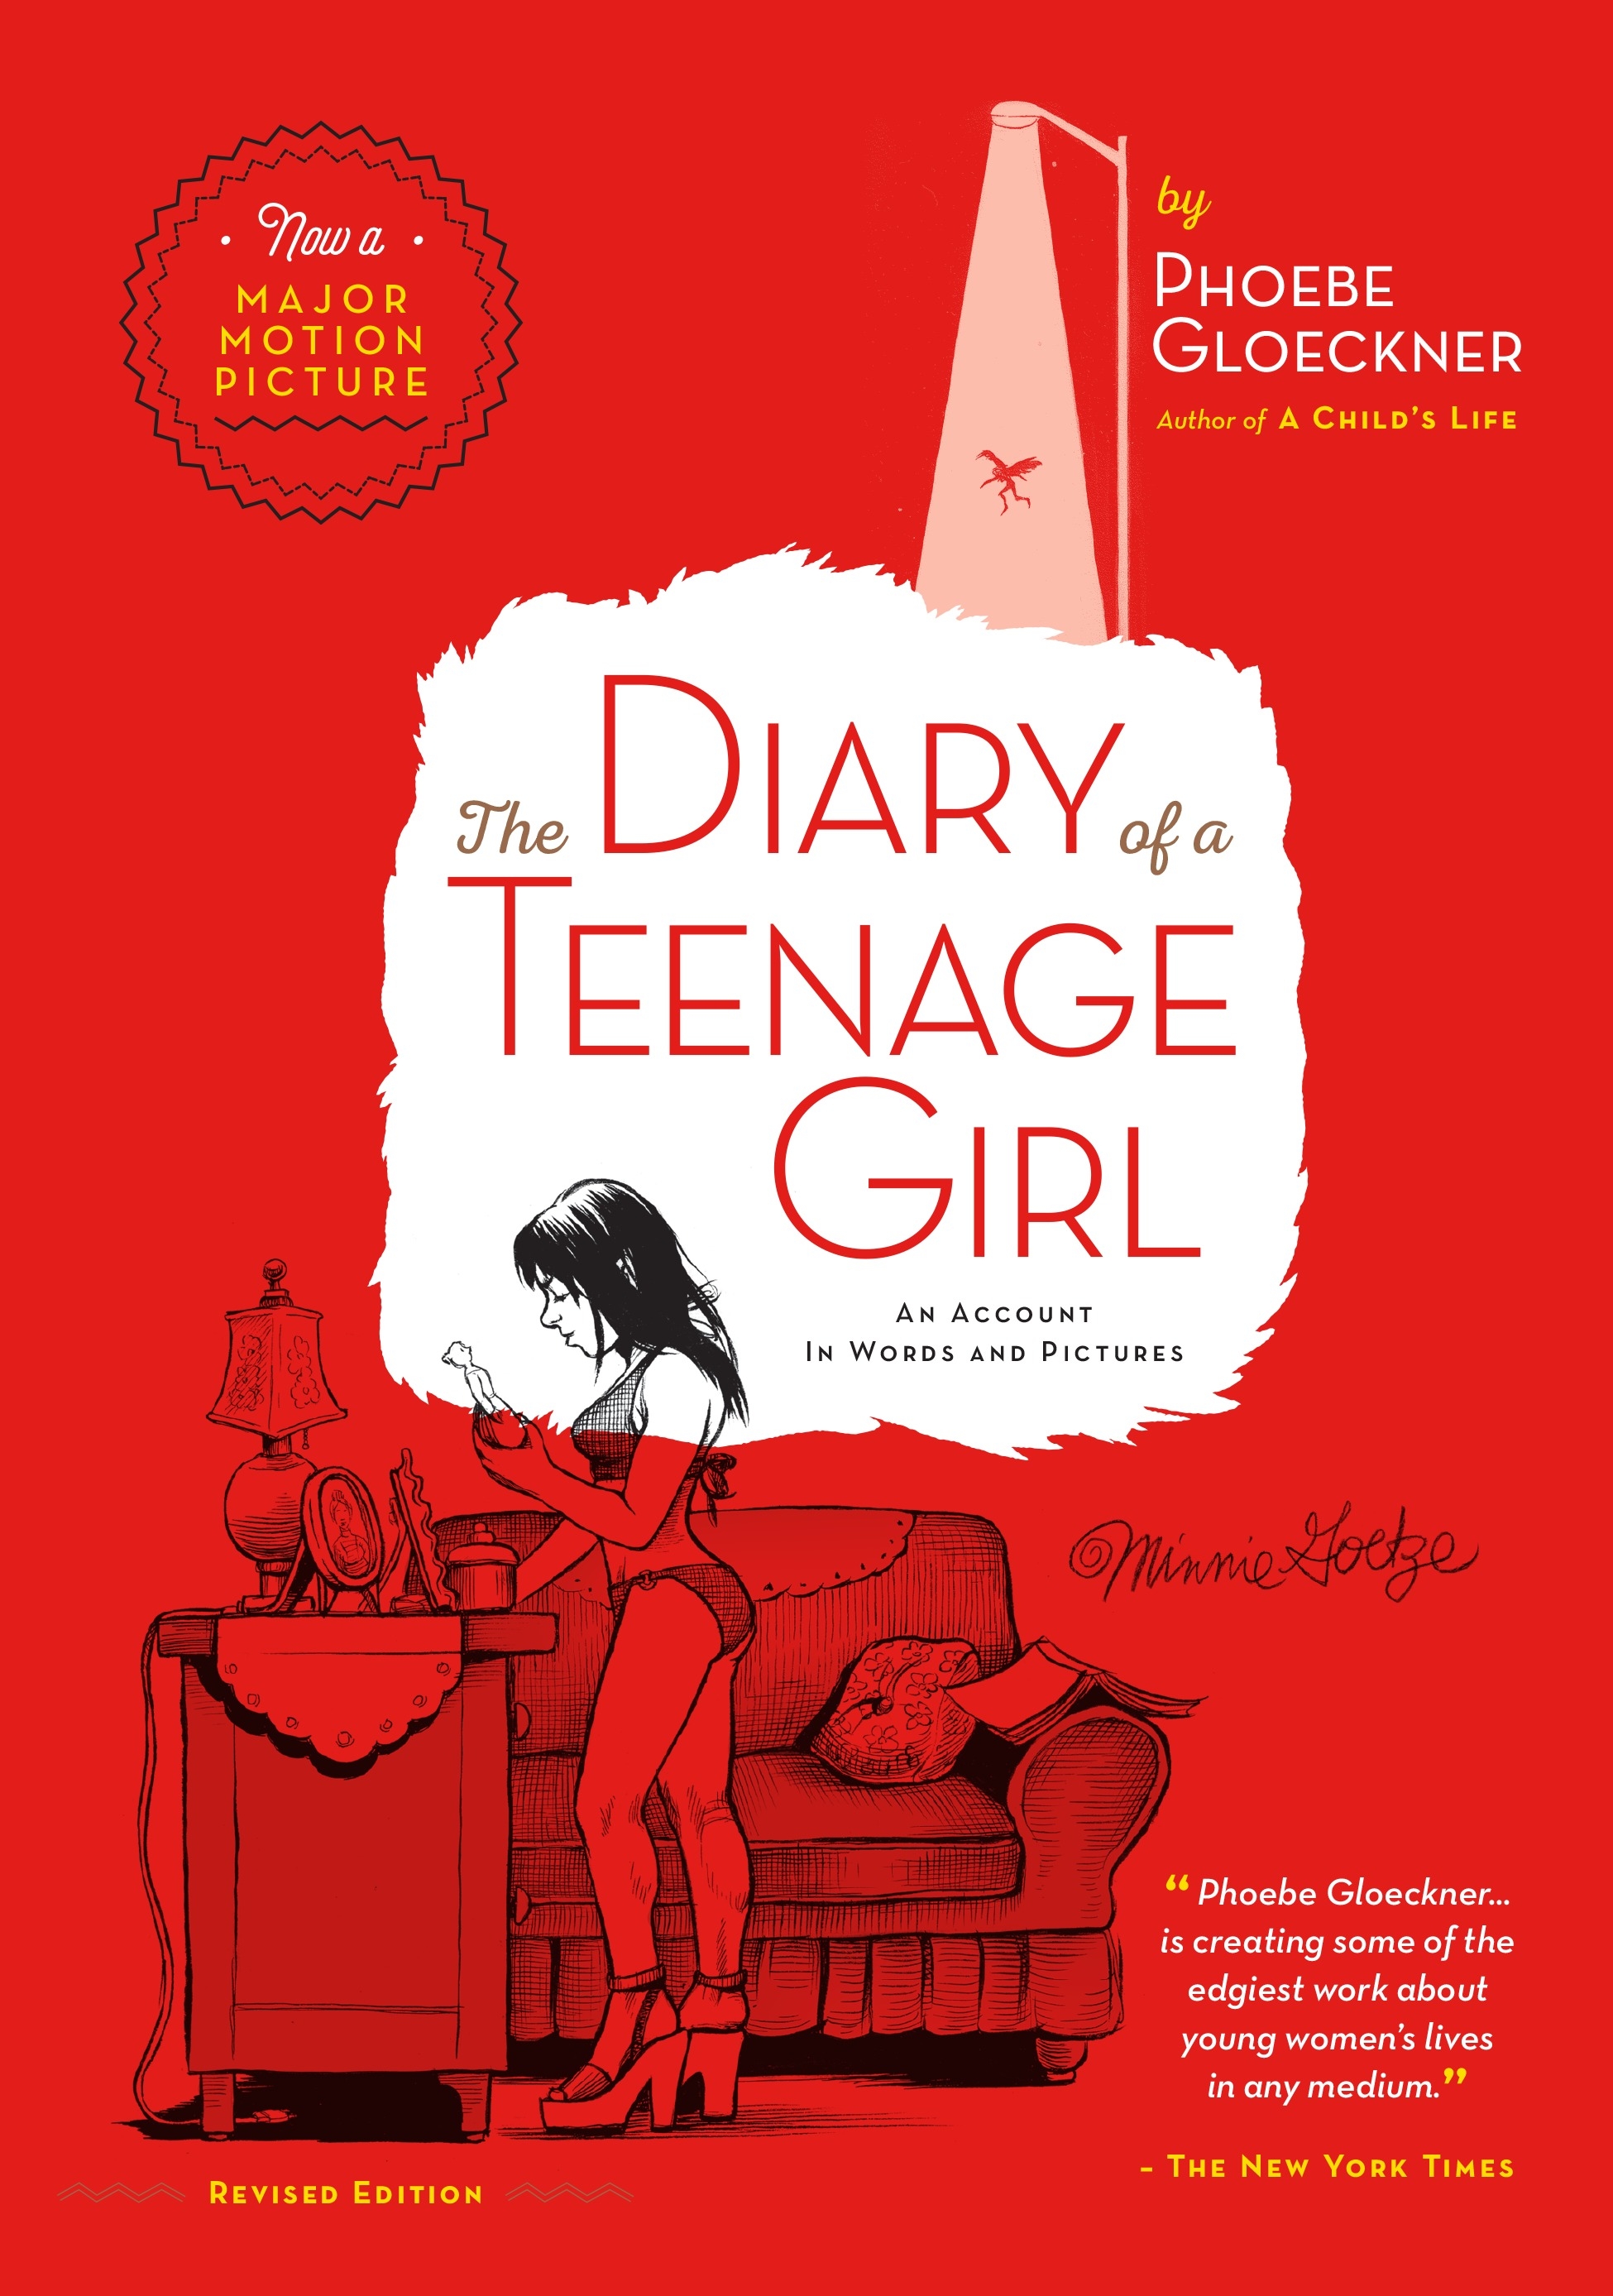 The Diary Of A Teenage Girl by Phoebe Gloeckner - Penguin Books